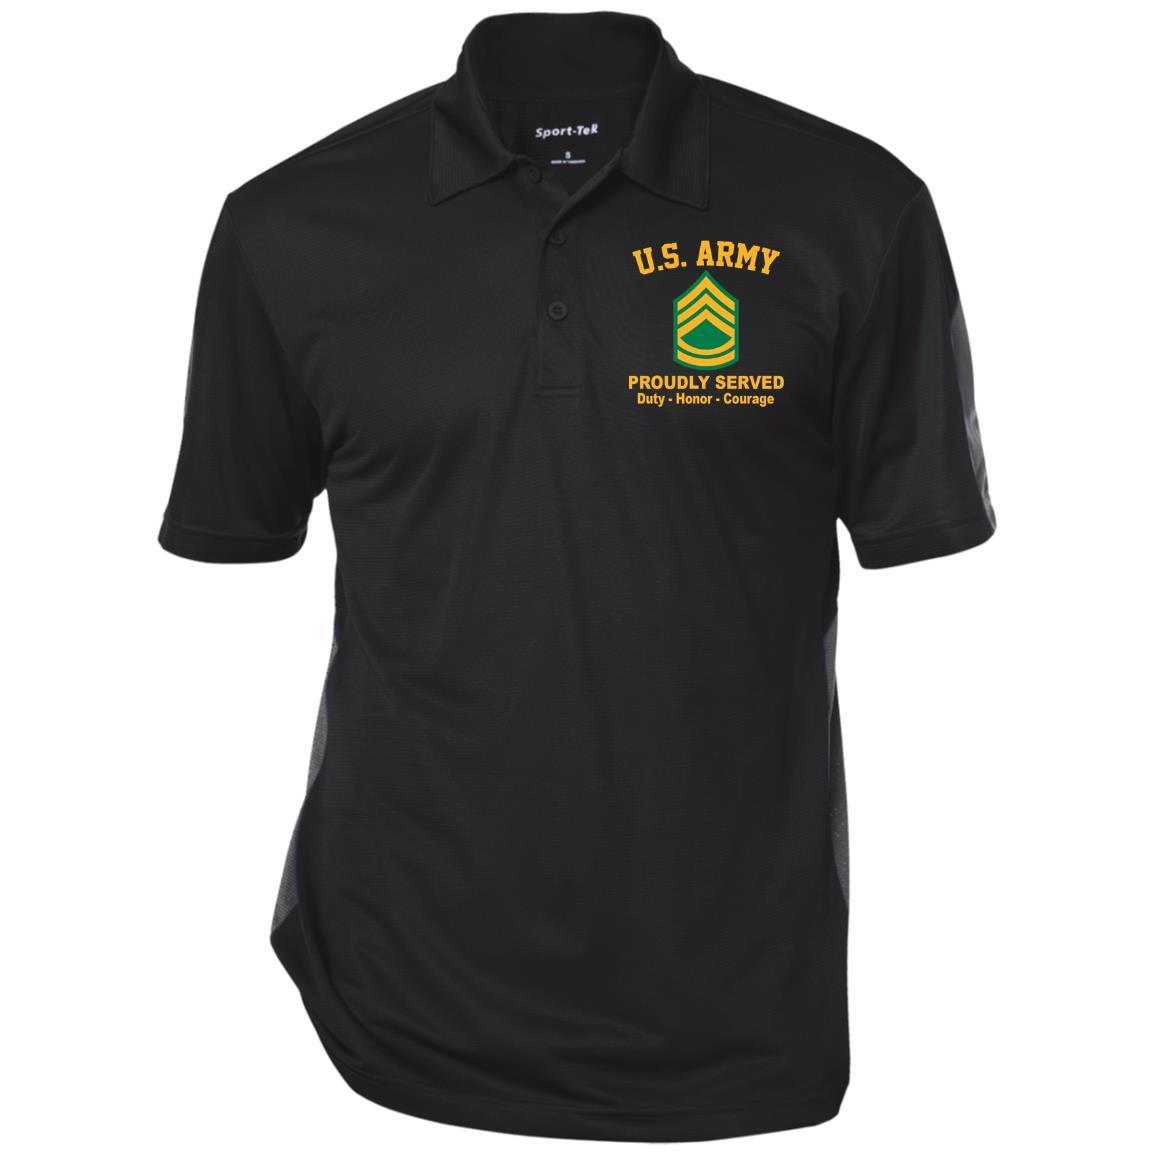 US Army E-7 Sergeant First Class E7 SFC Noncommissioned Officer Ranks Performance Printed Polo Shirt